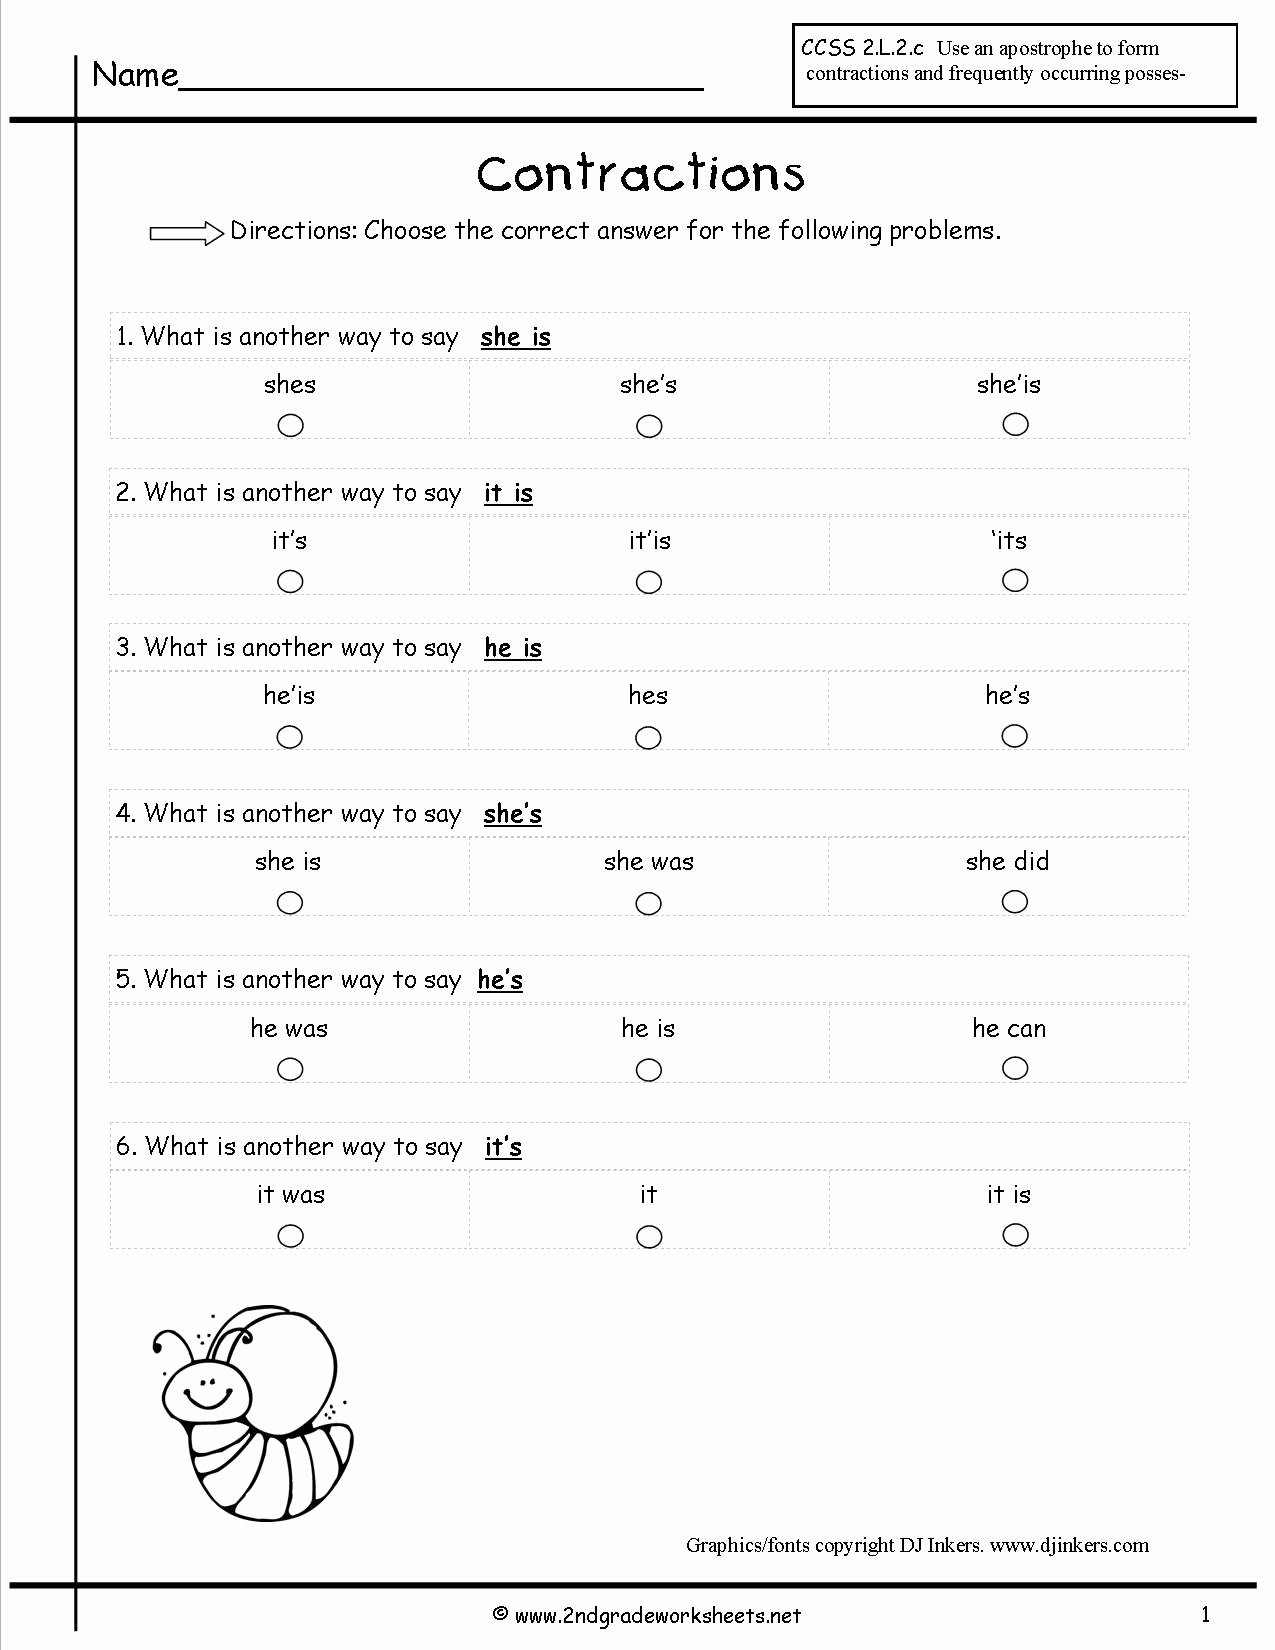 Contractions Worksheet 2nd Grade Awesome Free Contractions Worksheets and Printouts